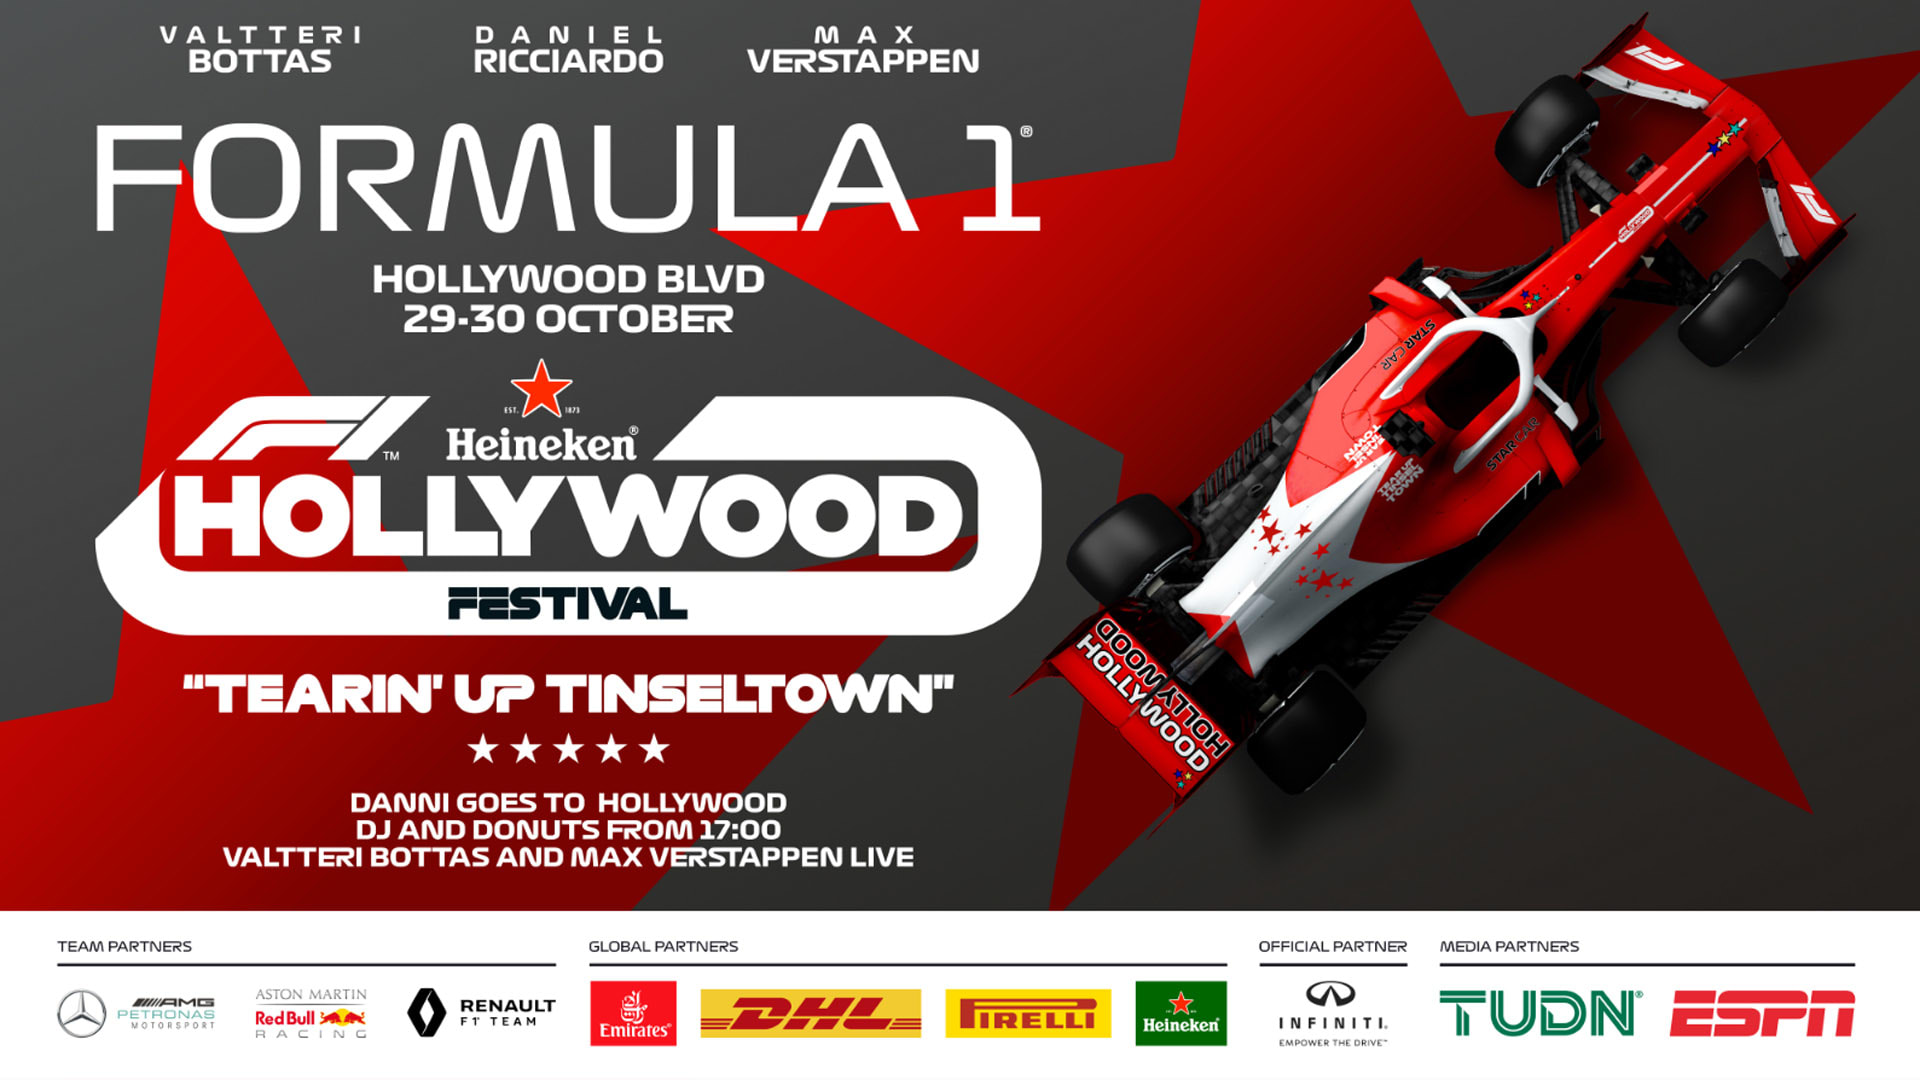 Formula 1 teams and drivers to bring racing spectacle to LA for F1 Hollywood Festival Formula 1®